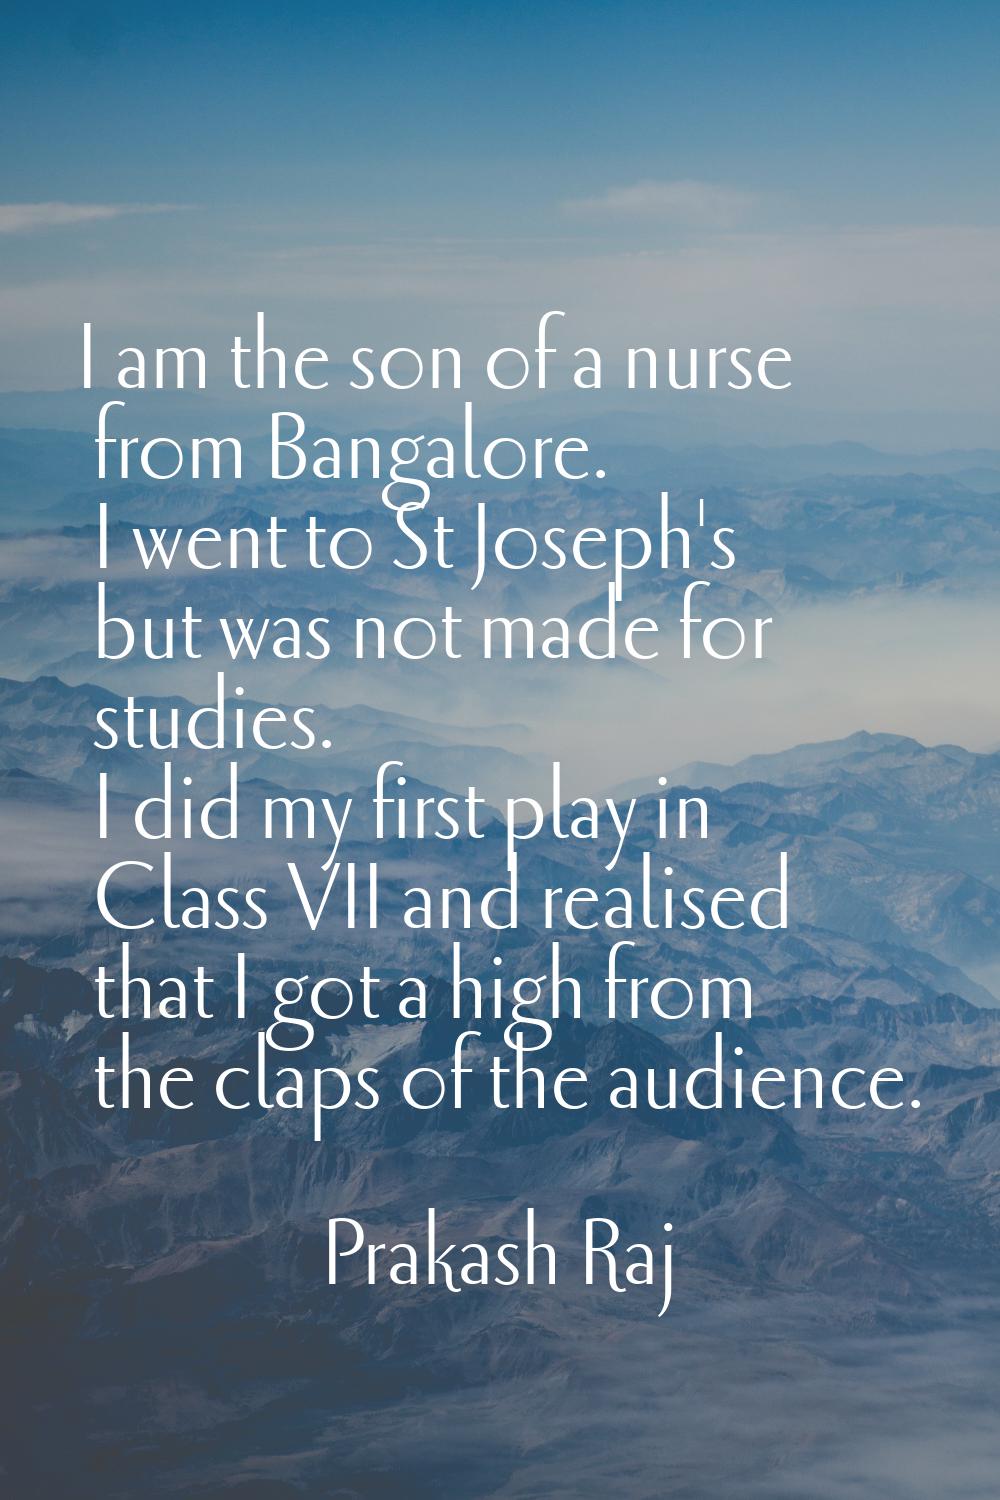 I am the son of a nurse from Bangalore. I went to St Joseph's but was not made for studies. I did m